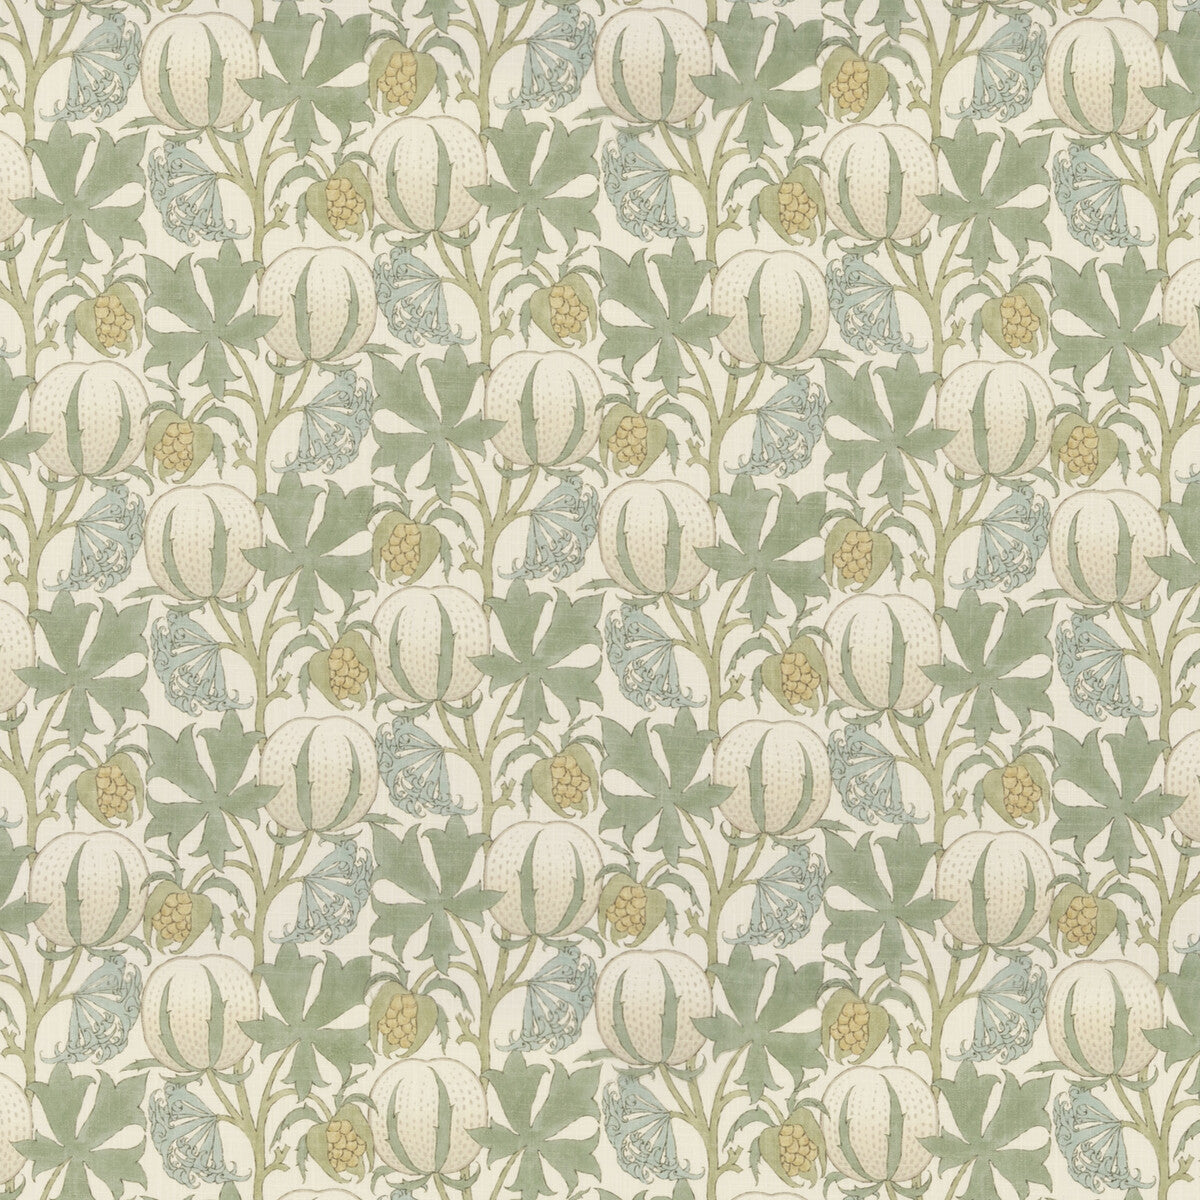 Pumpkins fabric in aqua color - pattern BP10981.2.0 - by G P &amp; J Baker in the Original Brantwood Fabric collection